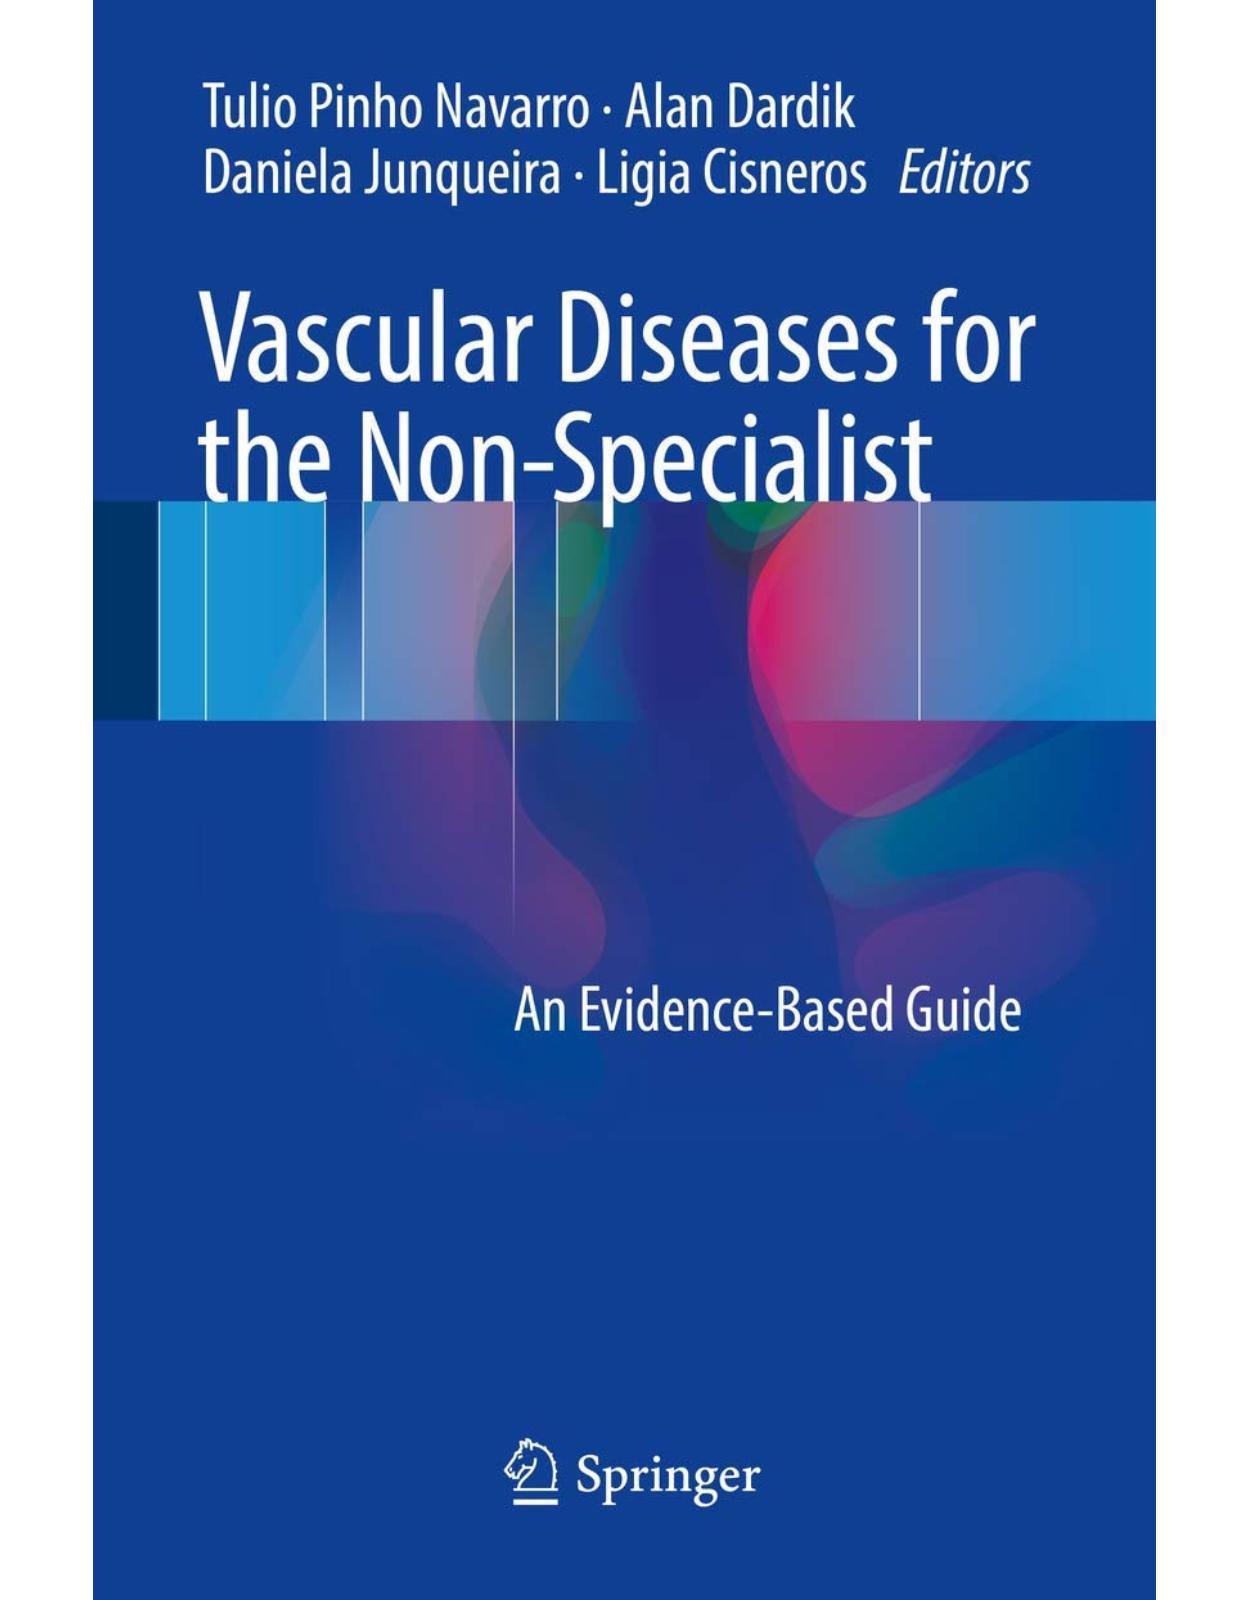 Vascular Diseases for the Non-Specialist: An Evidence-Based Guide 